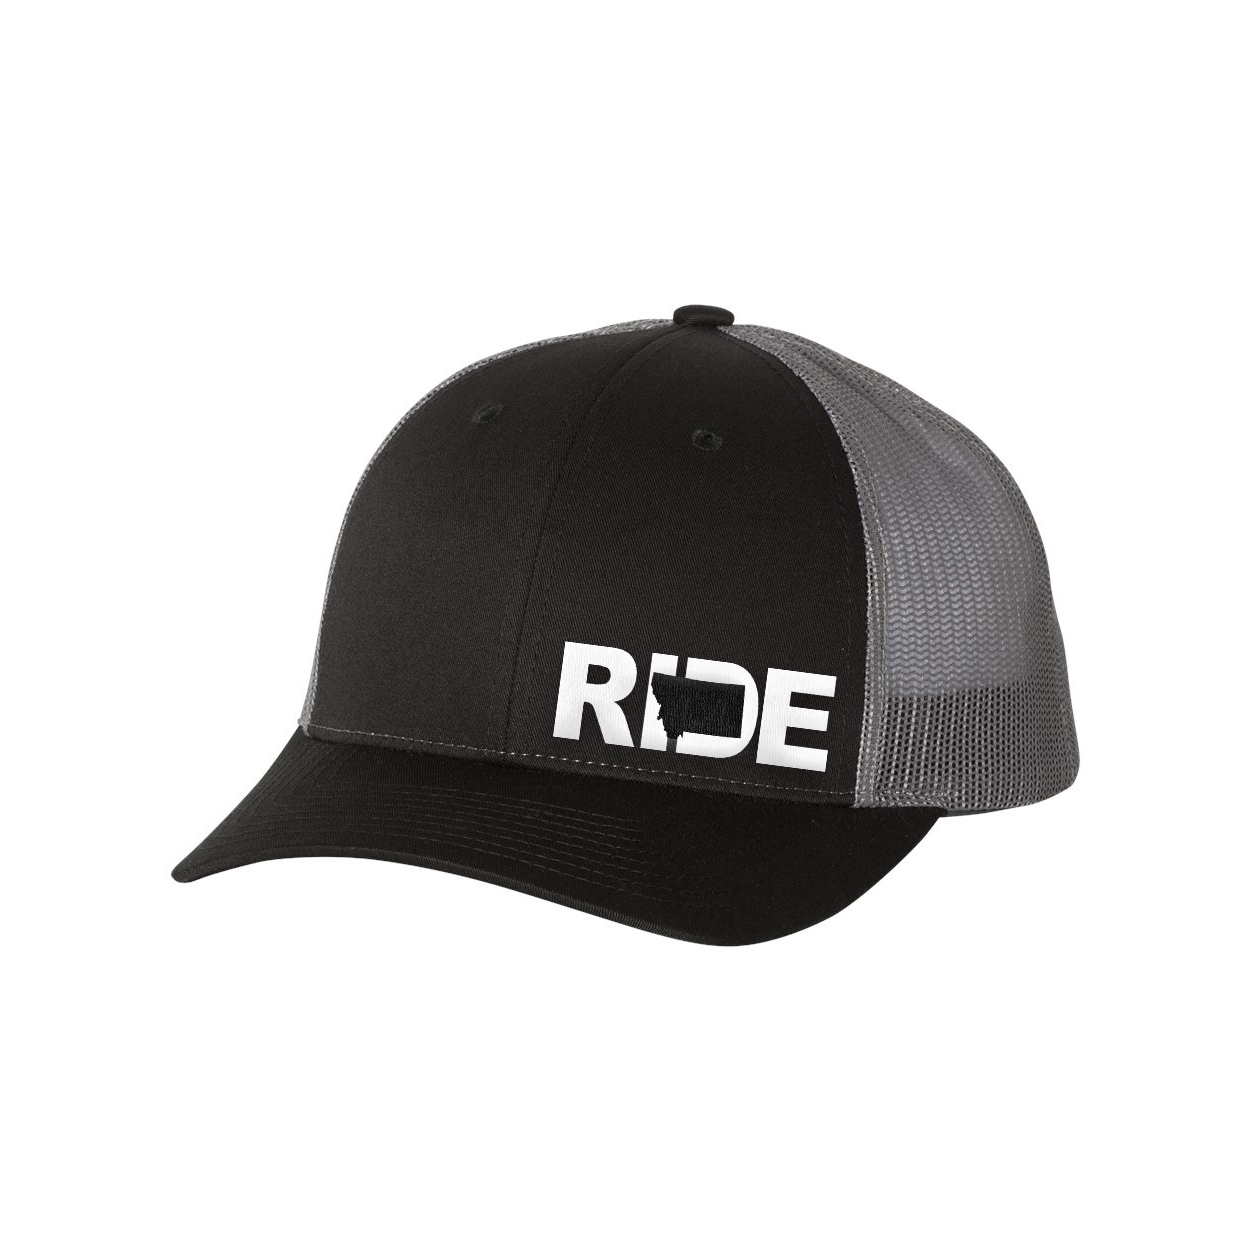 Ride Montana Night Out Embroidered Snapback Trucker Hat Black/Gray